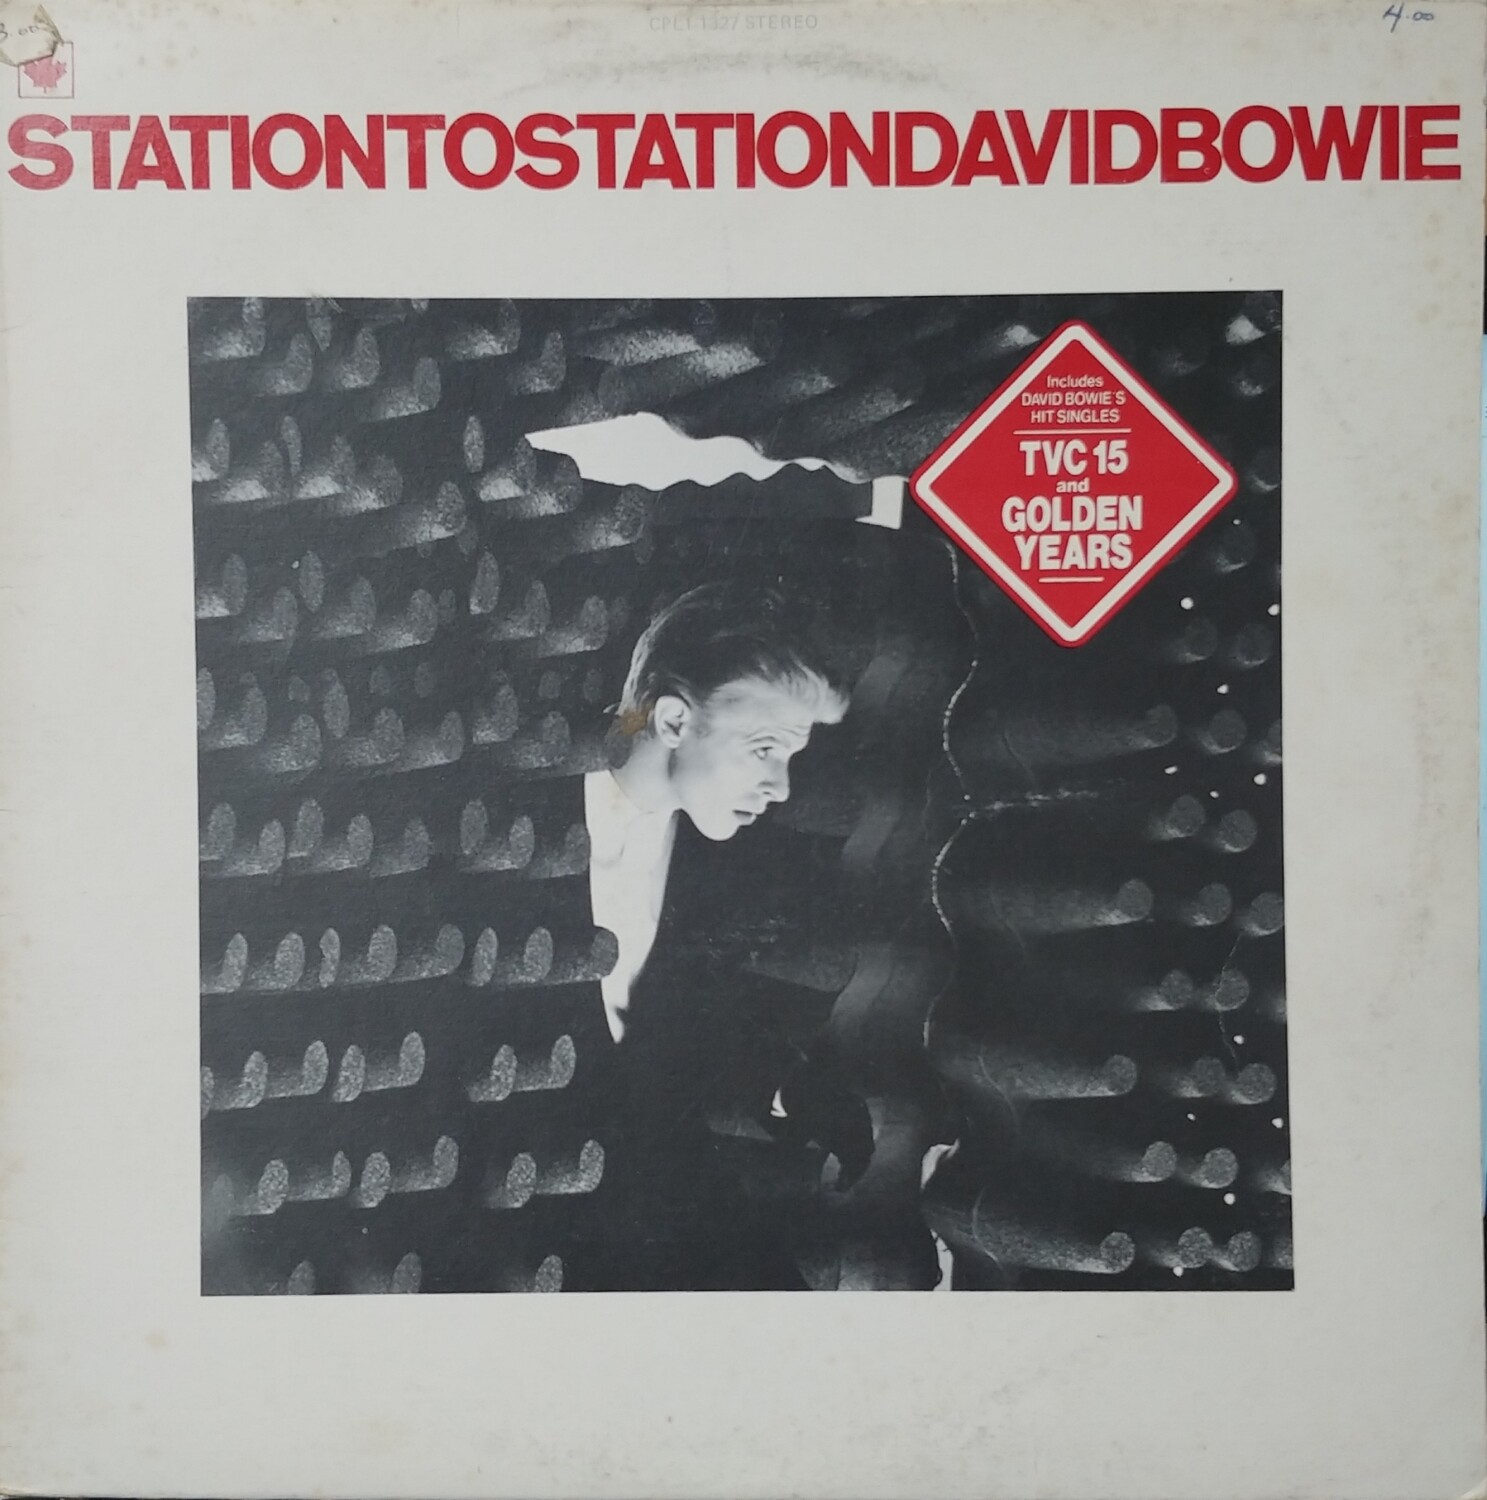 David Bowie - Station to station